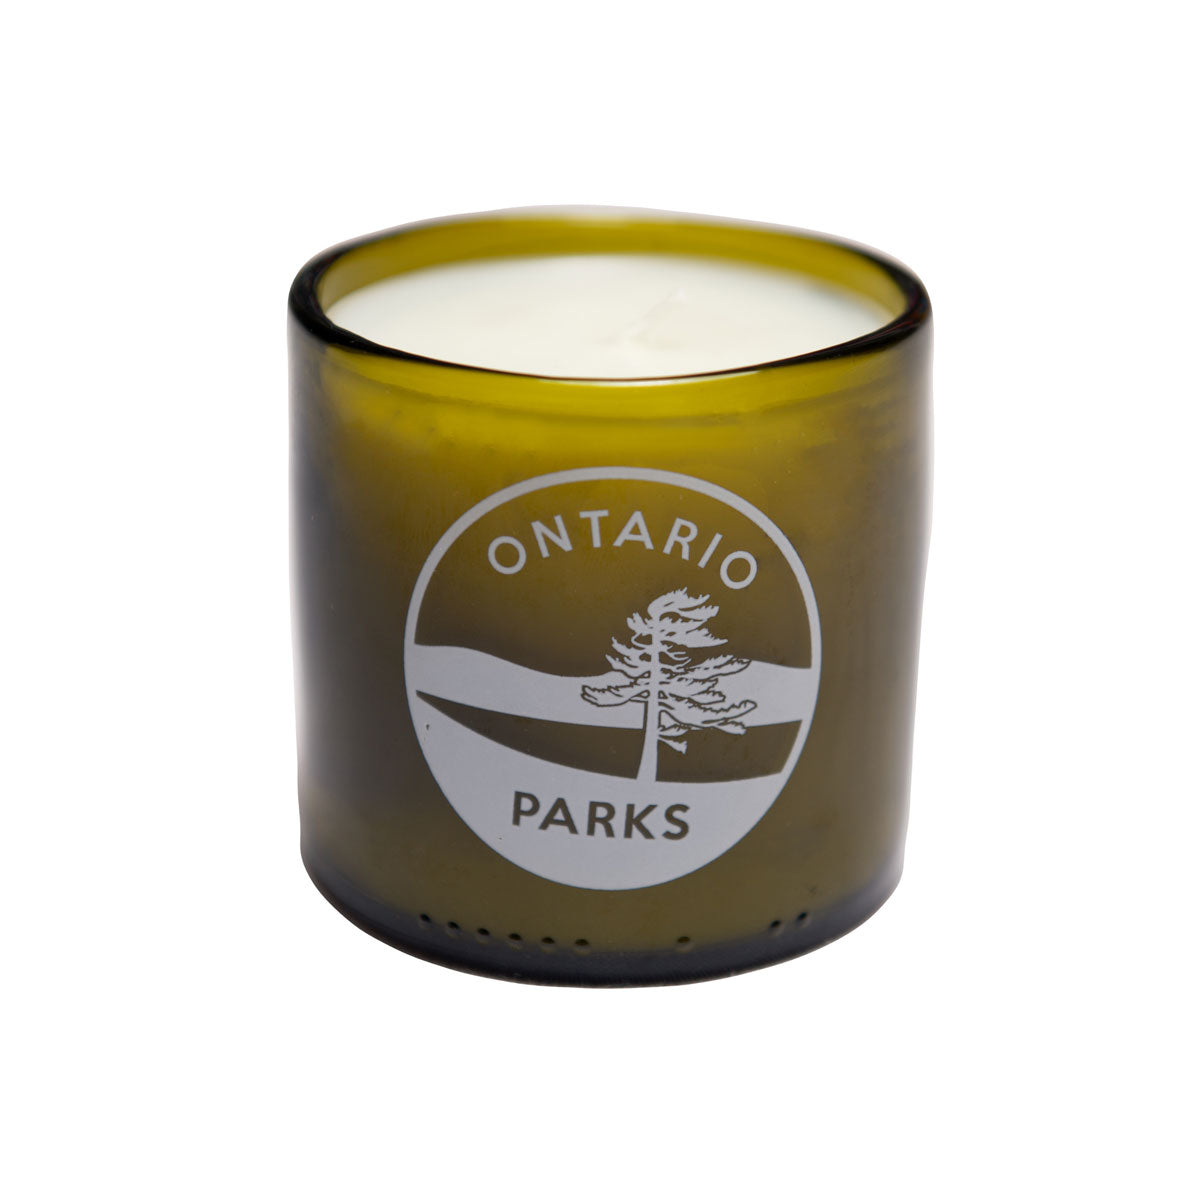 Hand blown glass jar candle in scent Campfire Nights. White Ontario Parks crest screened on glass.